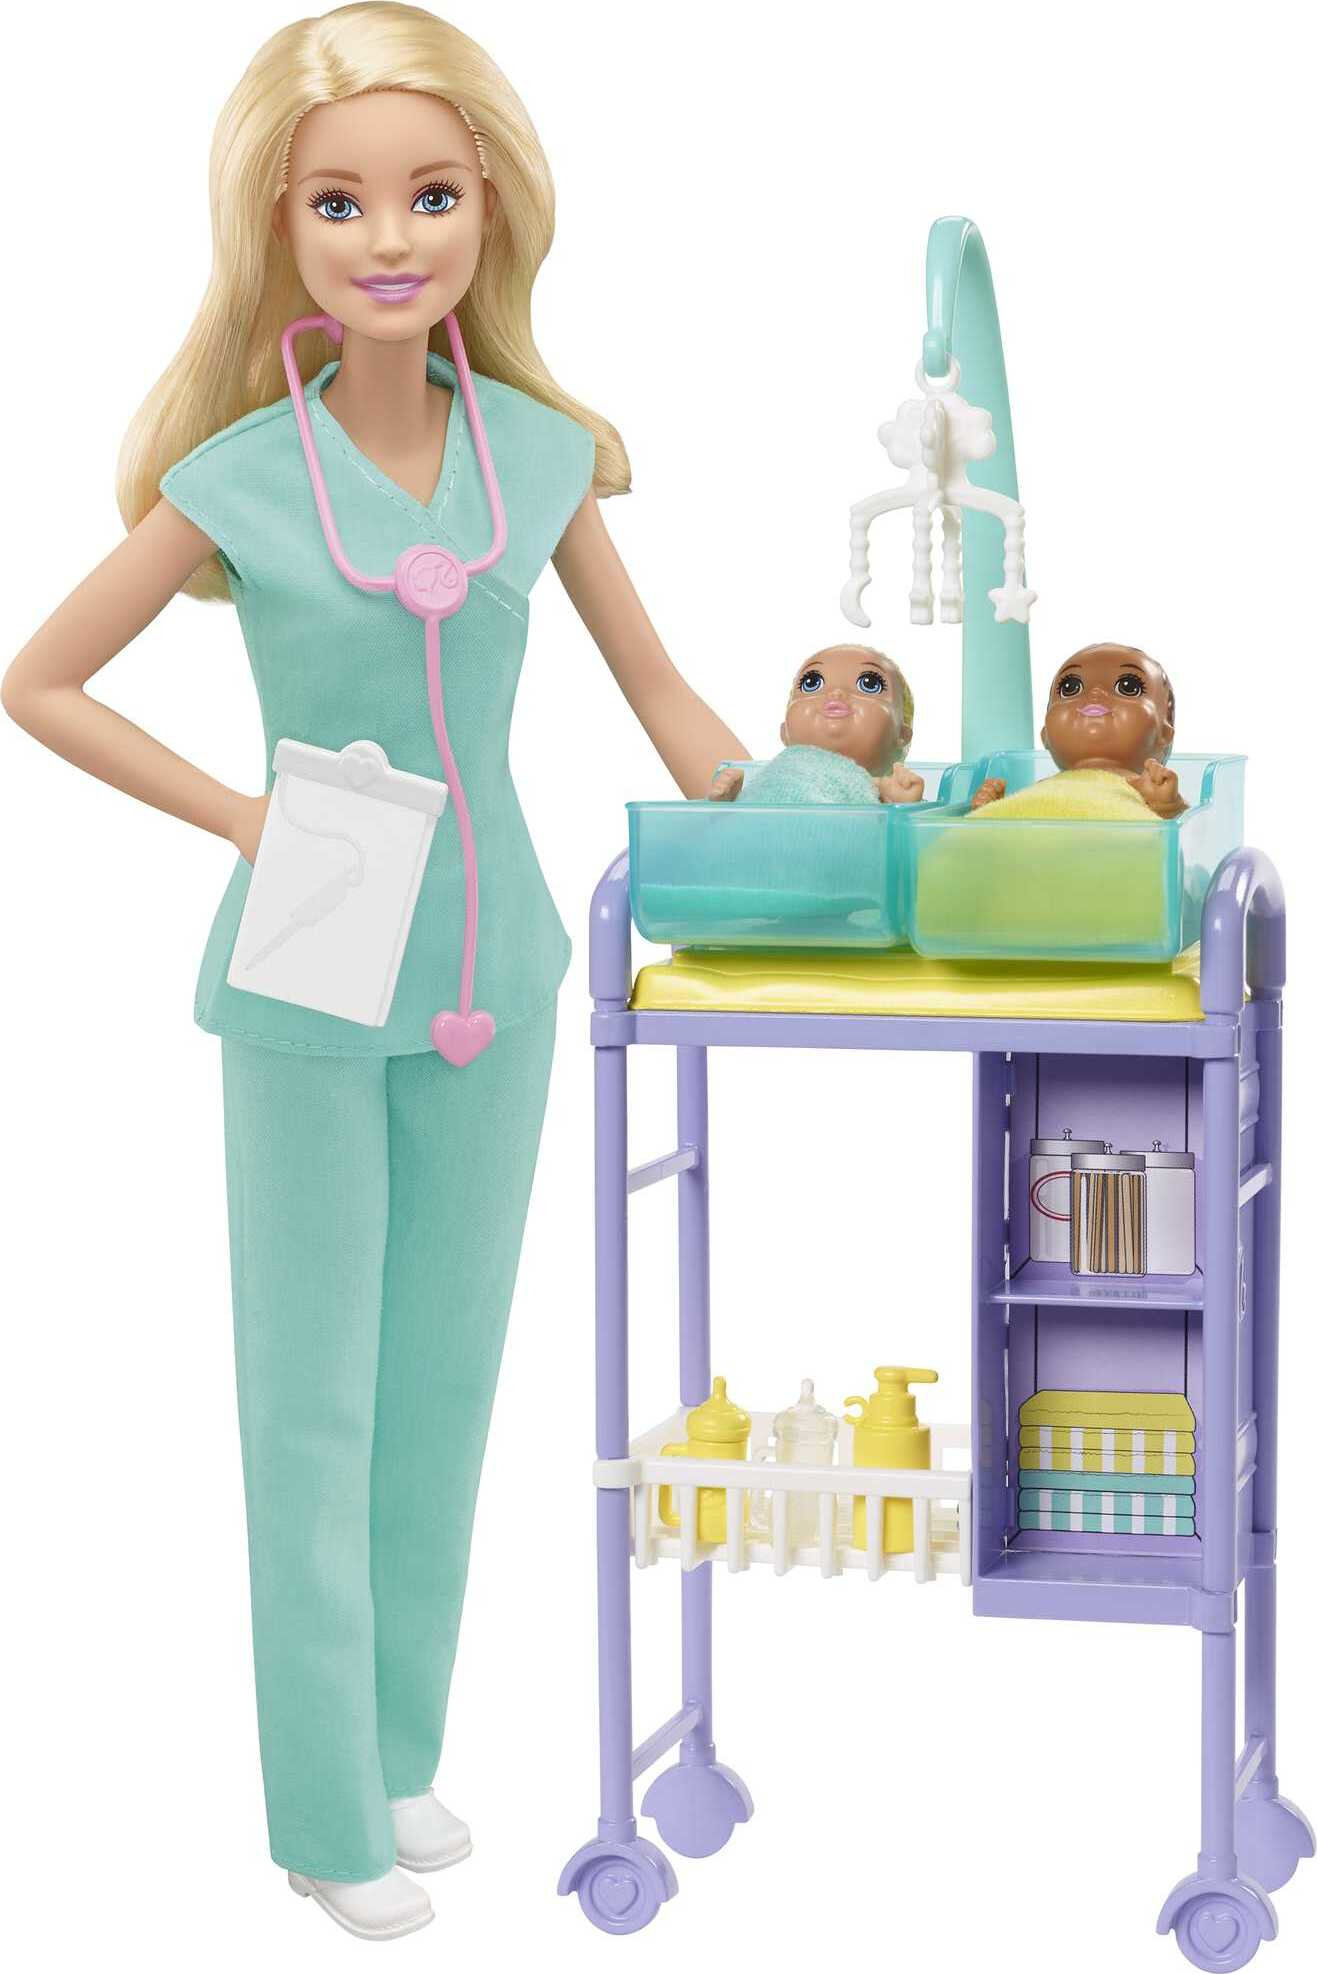 Barbie Careers Baby Doctor Playset with Blonde Fashion Doll, 2 Baby Dolls, Furniture & Accessories - image 1 of 6